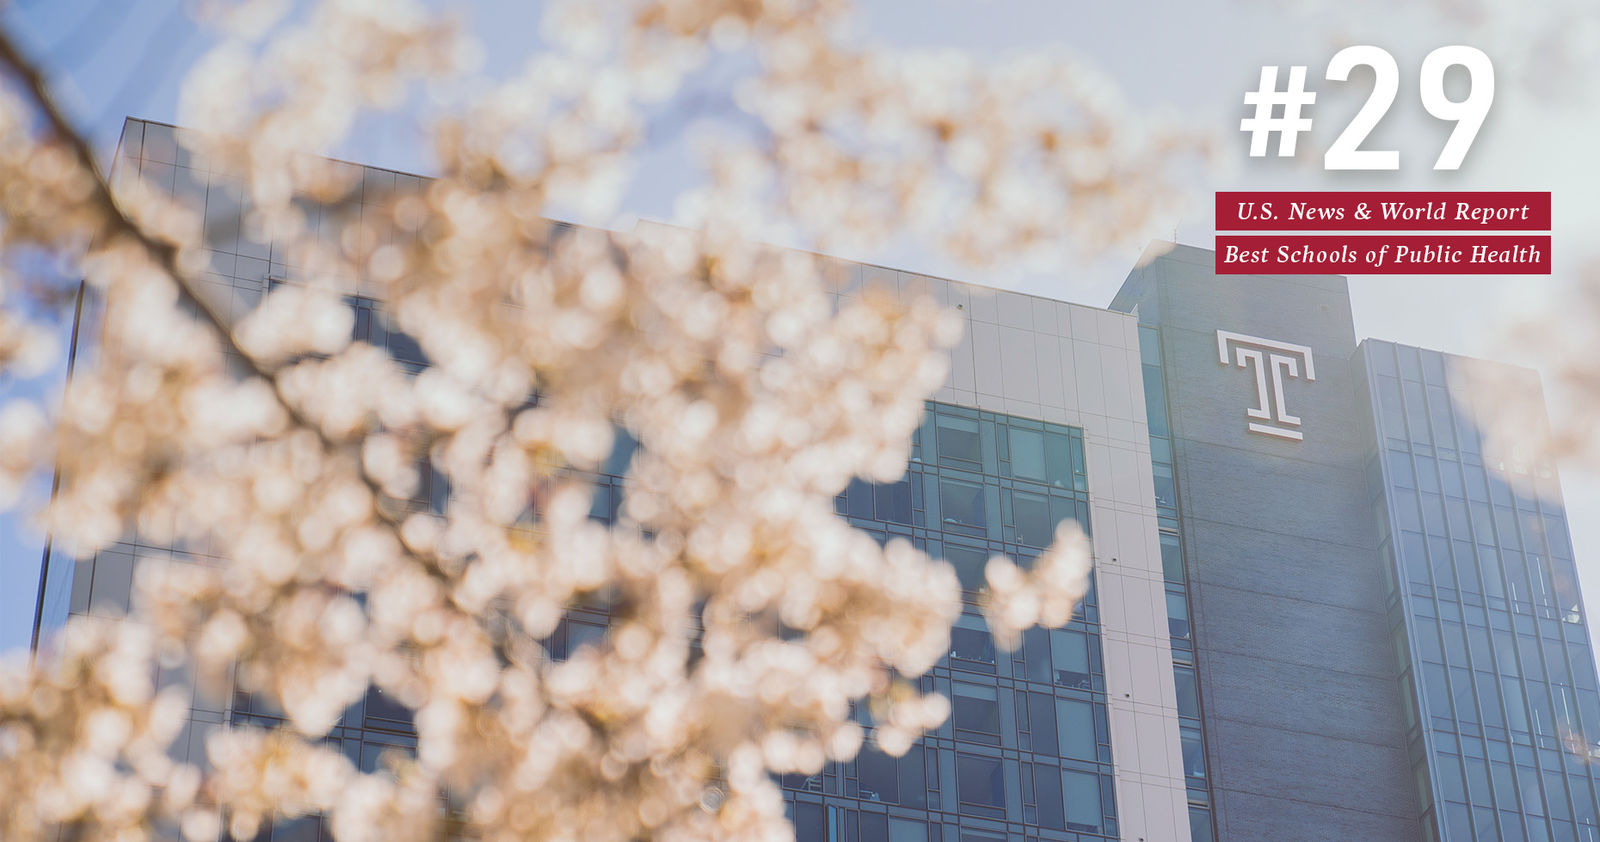 Text that reads "#29 U.S. News and World Report Best Schools of Public Health" is overlaid on top of a photo of Temple's Morgan Hall, visible behind a cherry blossom branch